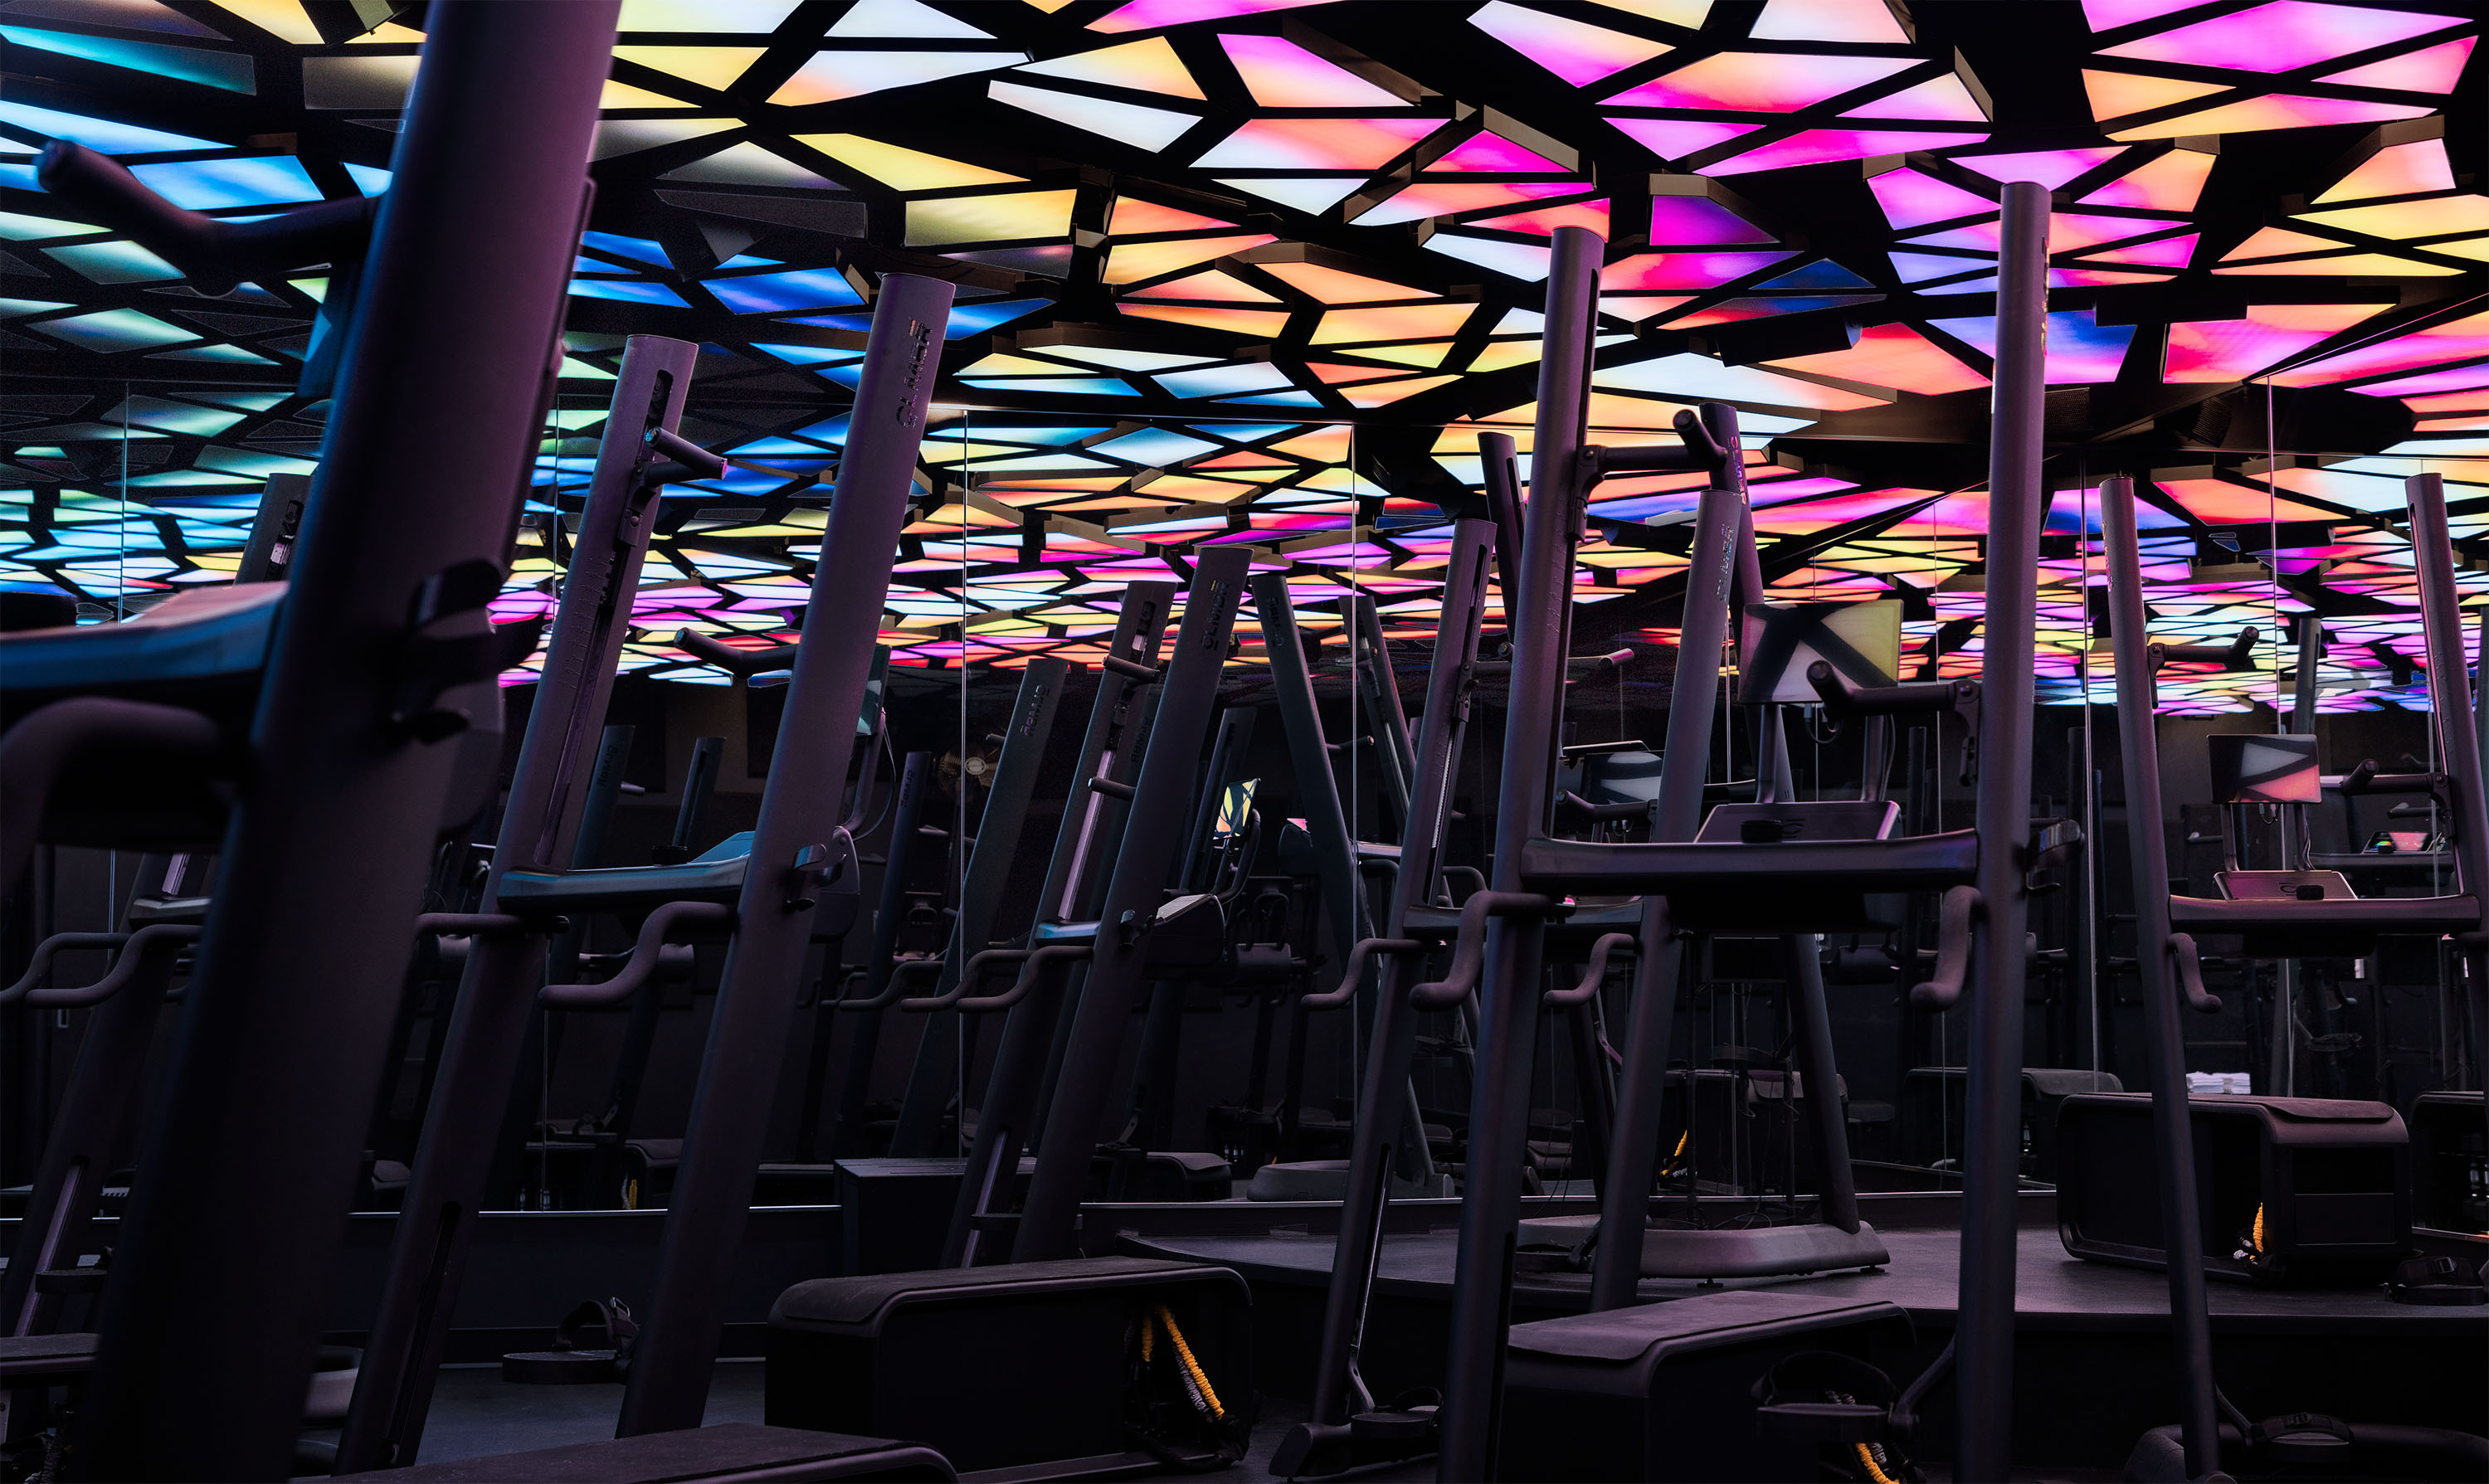 Cactus uses immersive lighting gym installations to boost workout